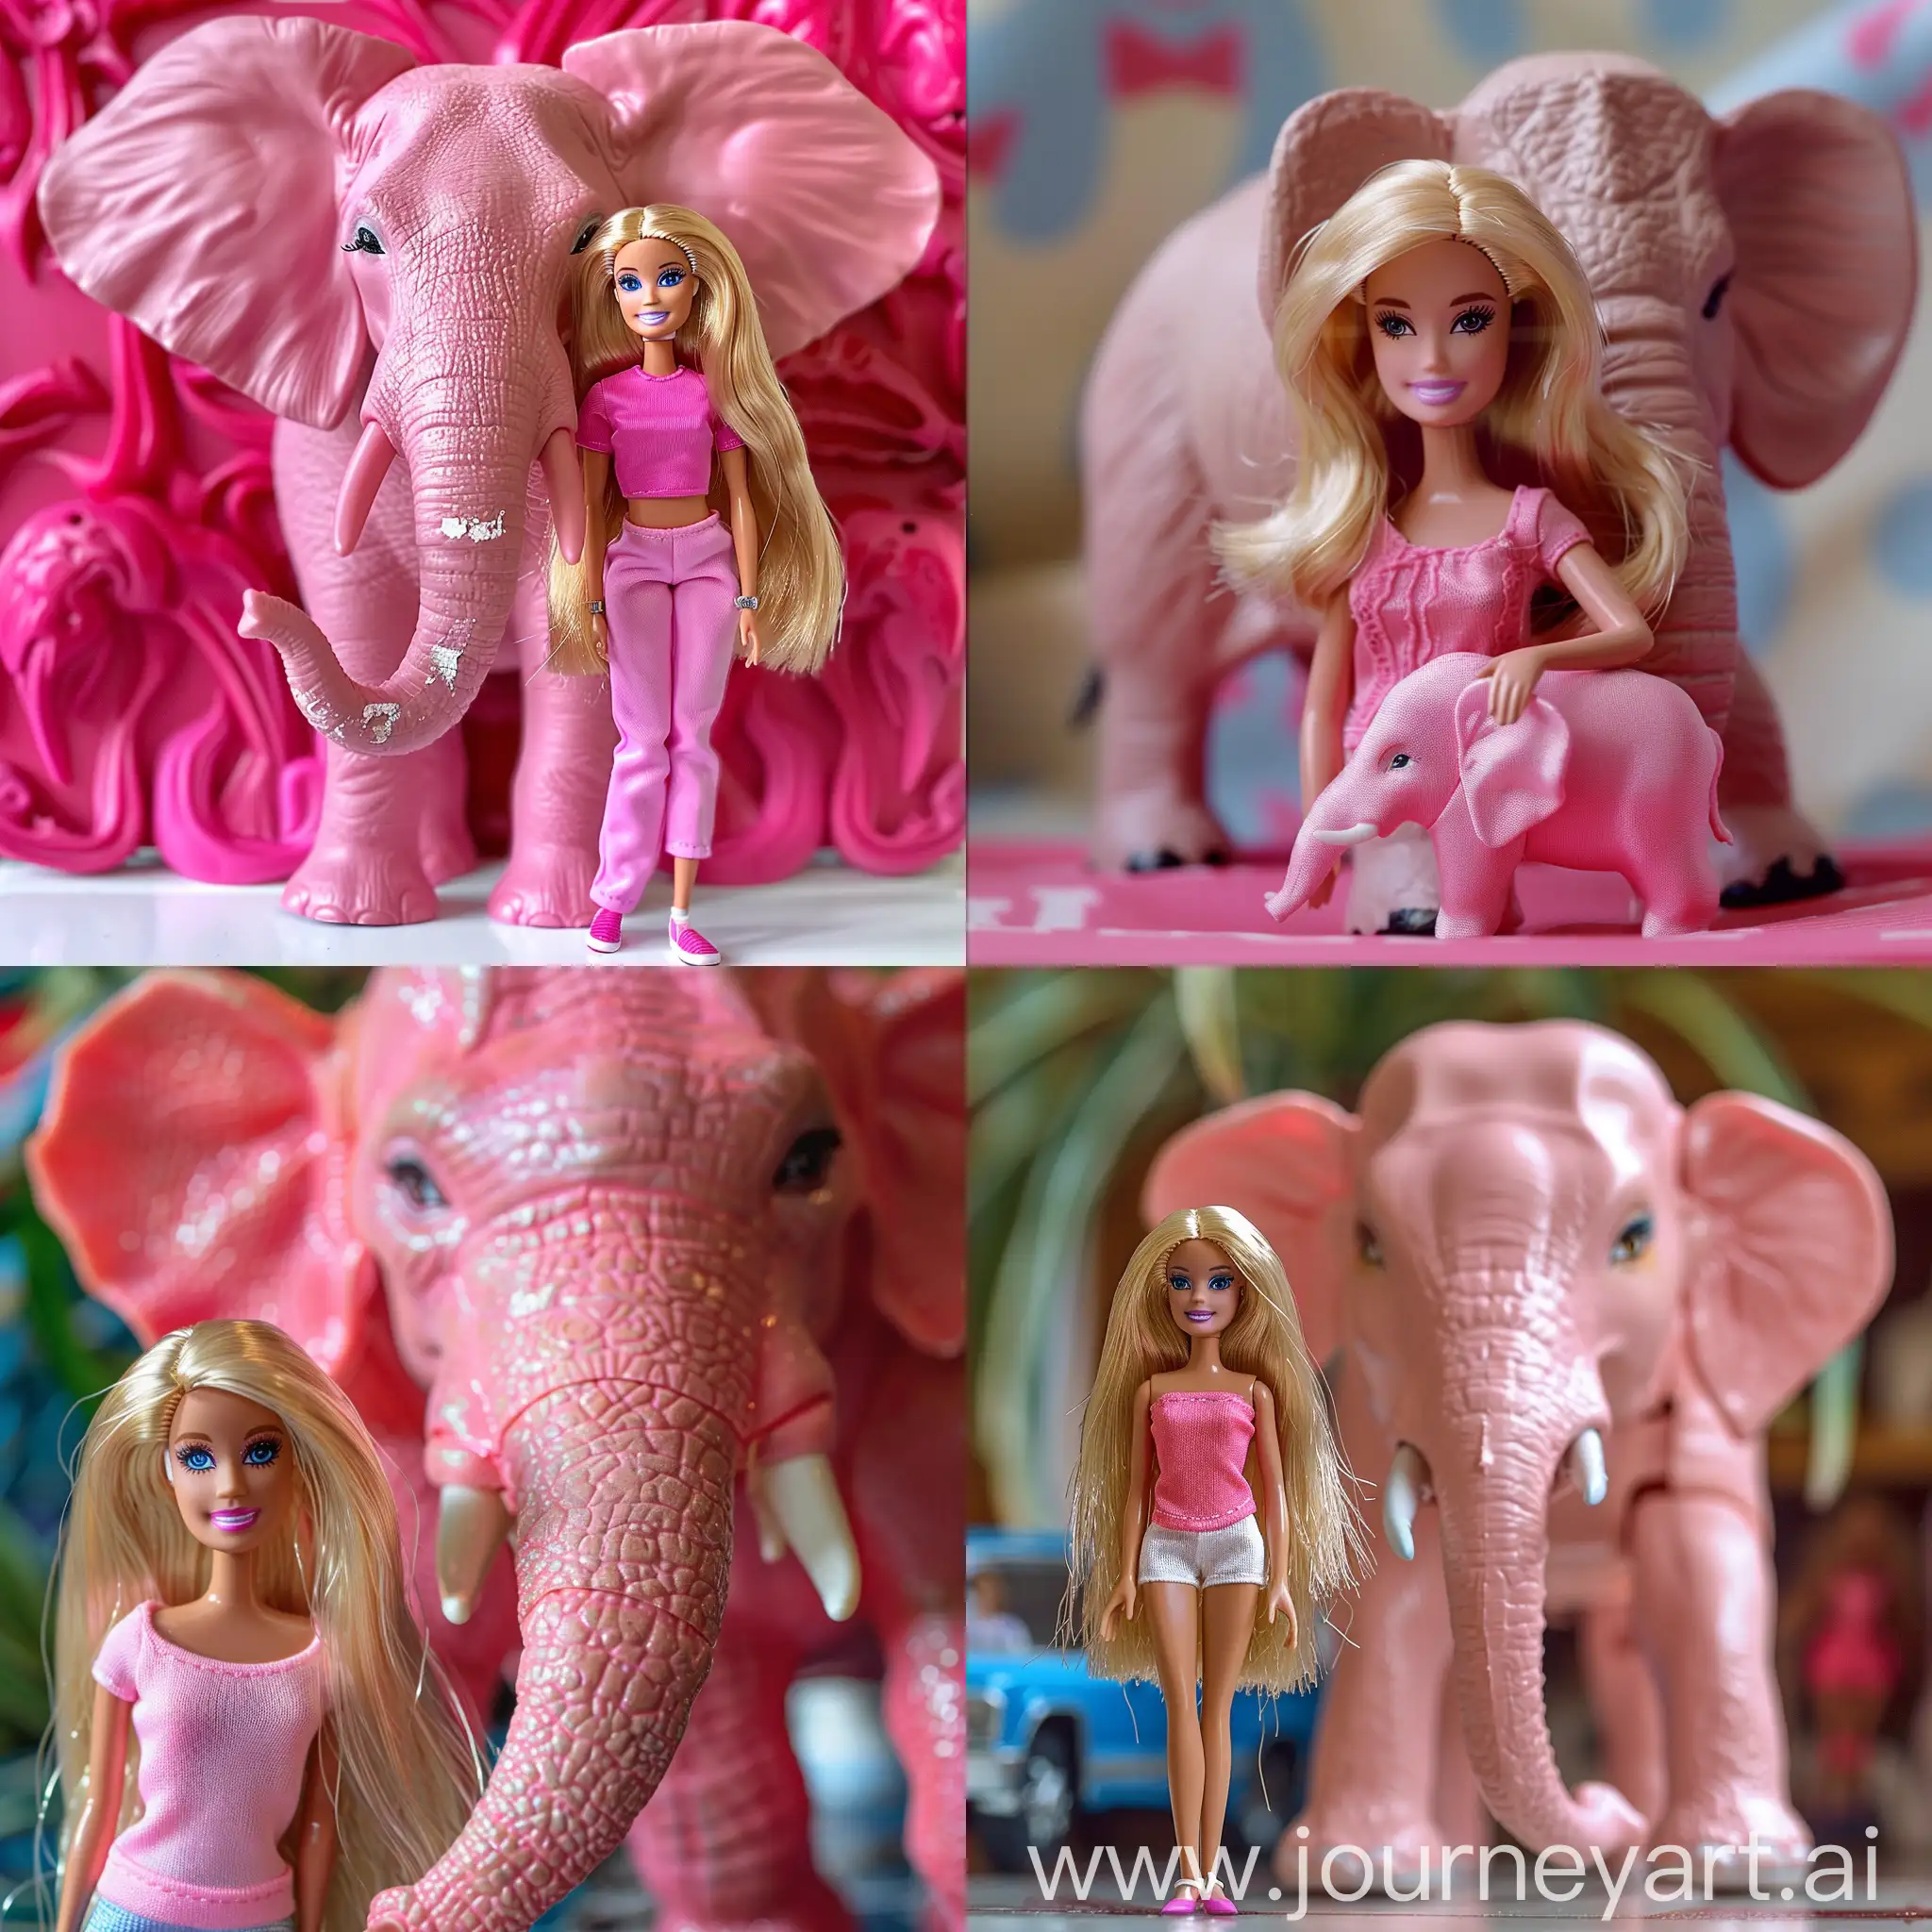 Whimsical-Pink-Elephant-and-Barbie-Dolls